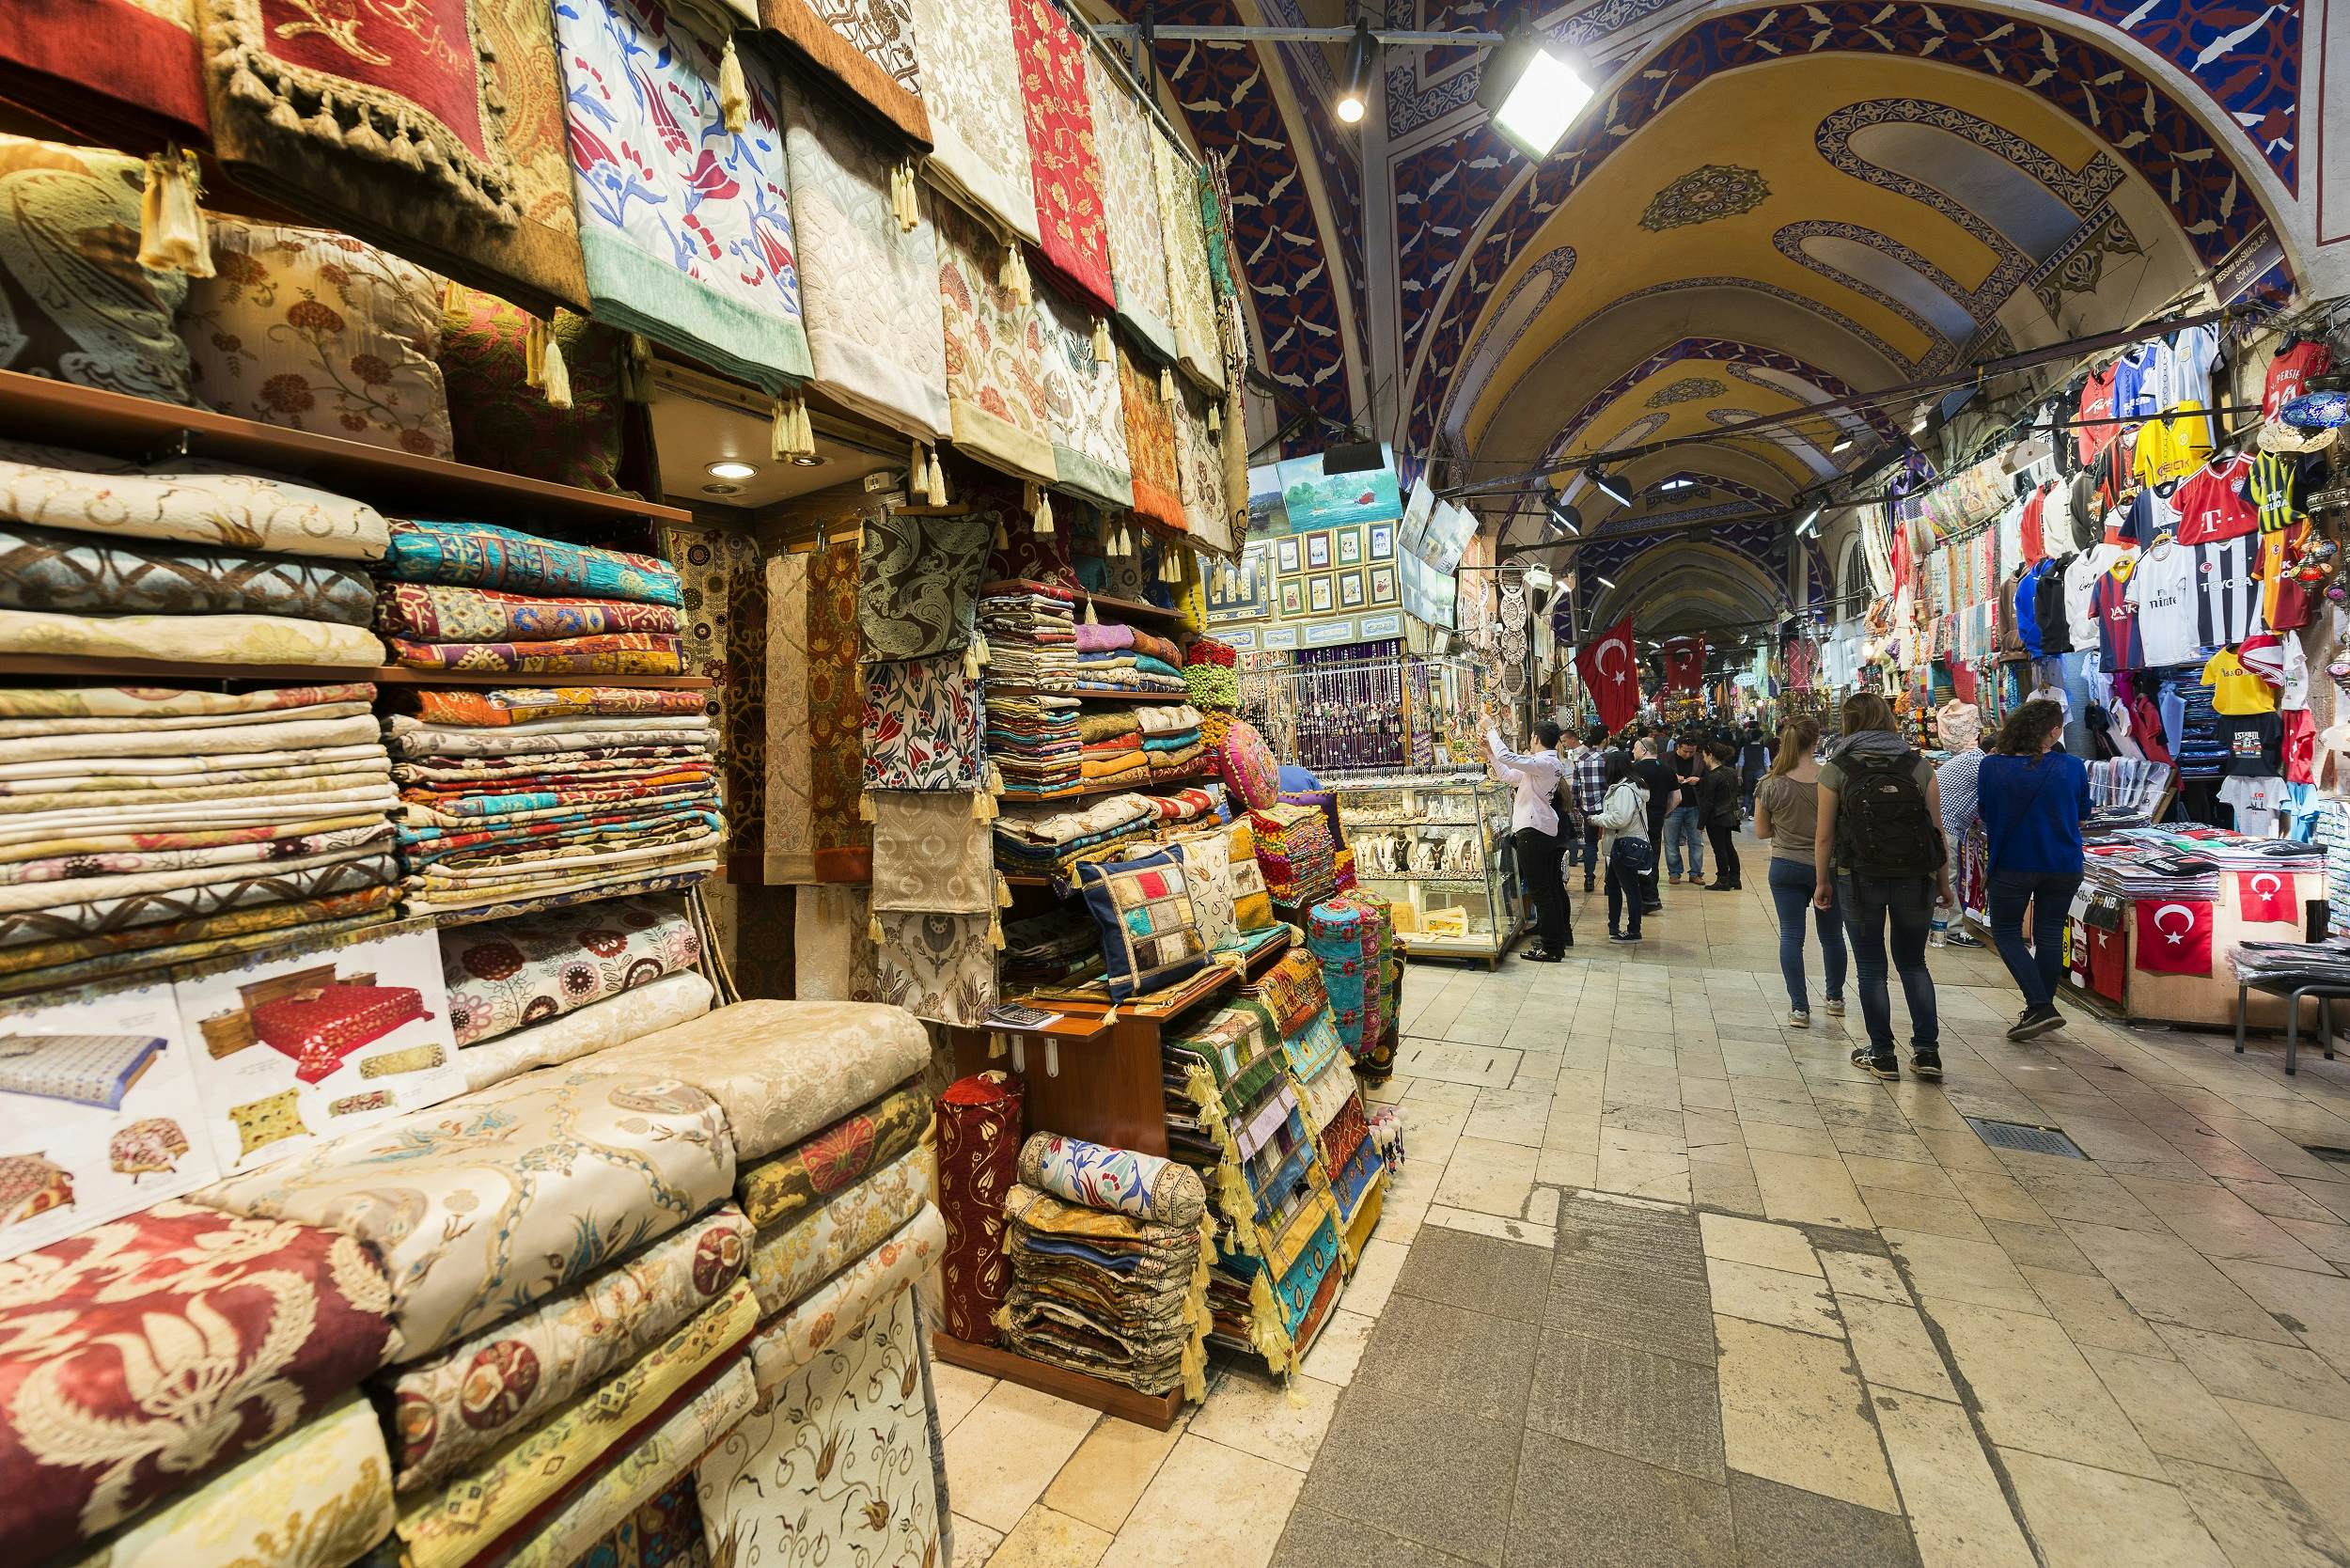 The dying art of bargaining in Istanbul's Grand Bazaar